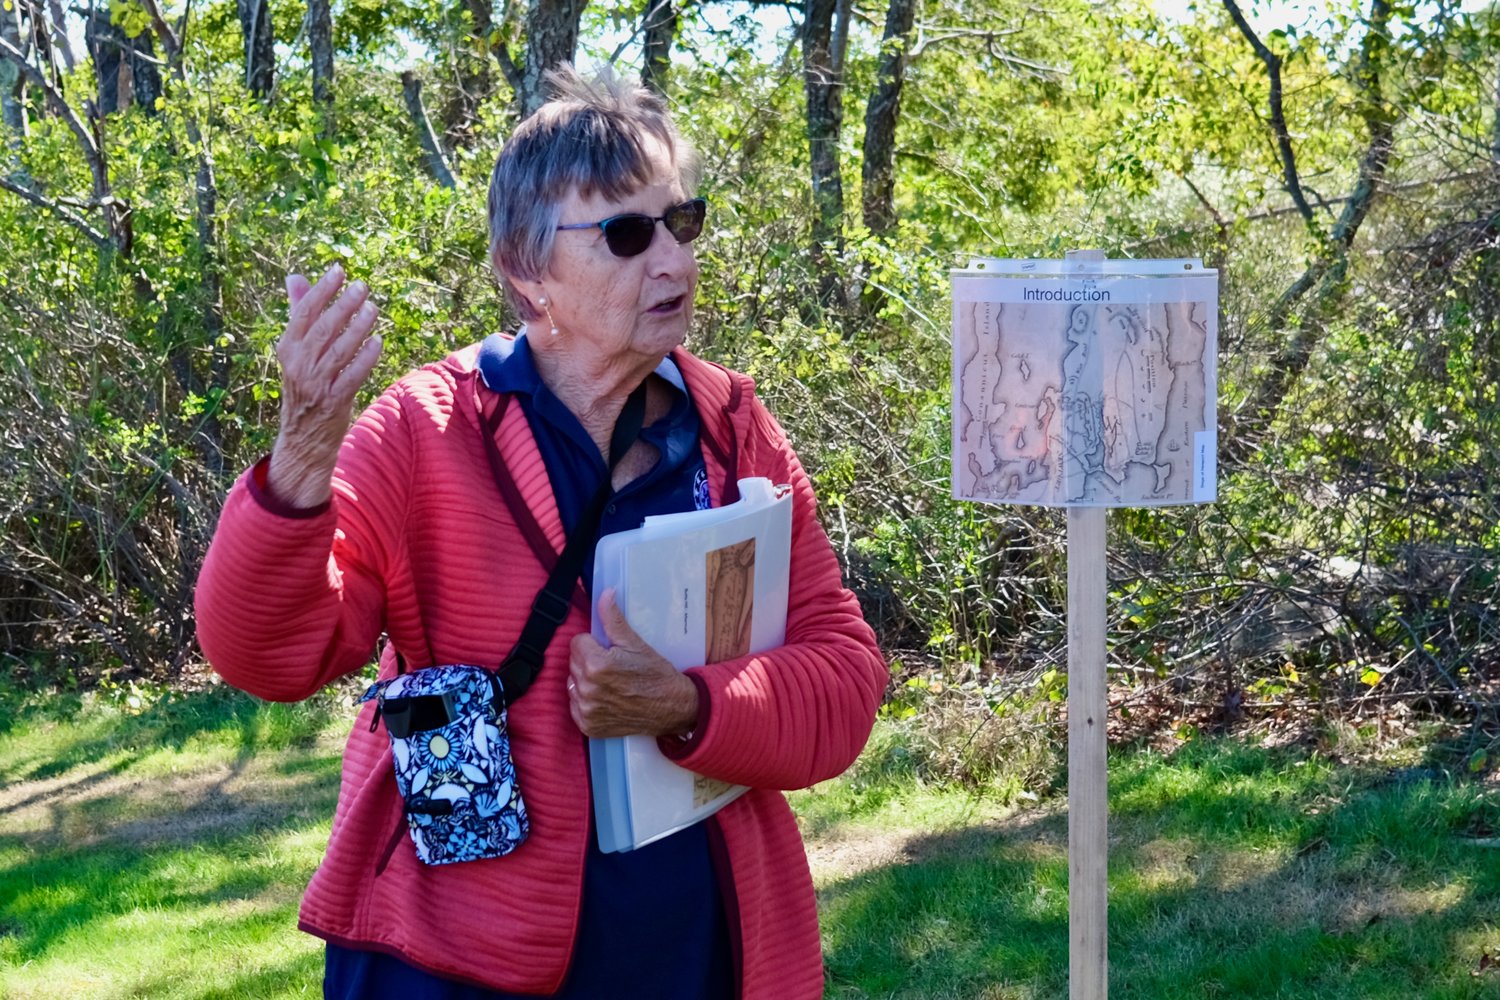 Gloria Schmidt, one of the main organizers and a guide on Saturday, makes introductory remarks to her group.